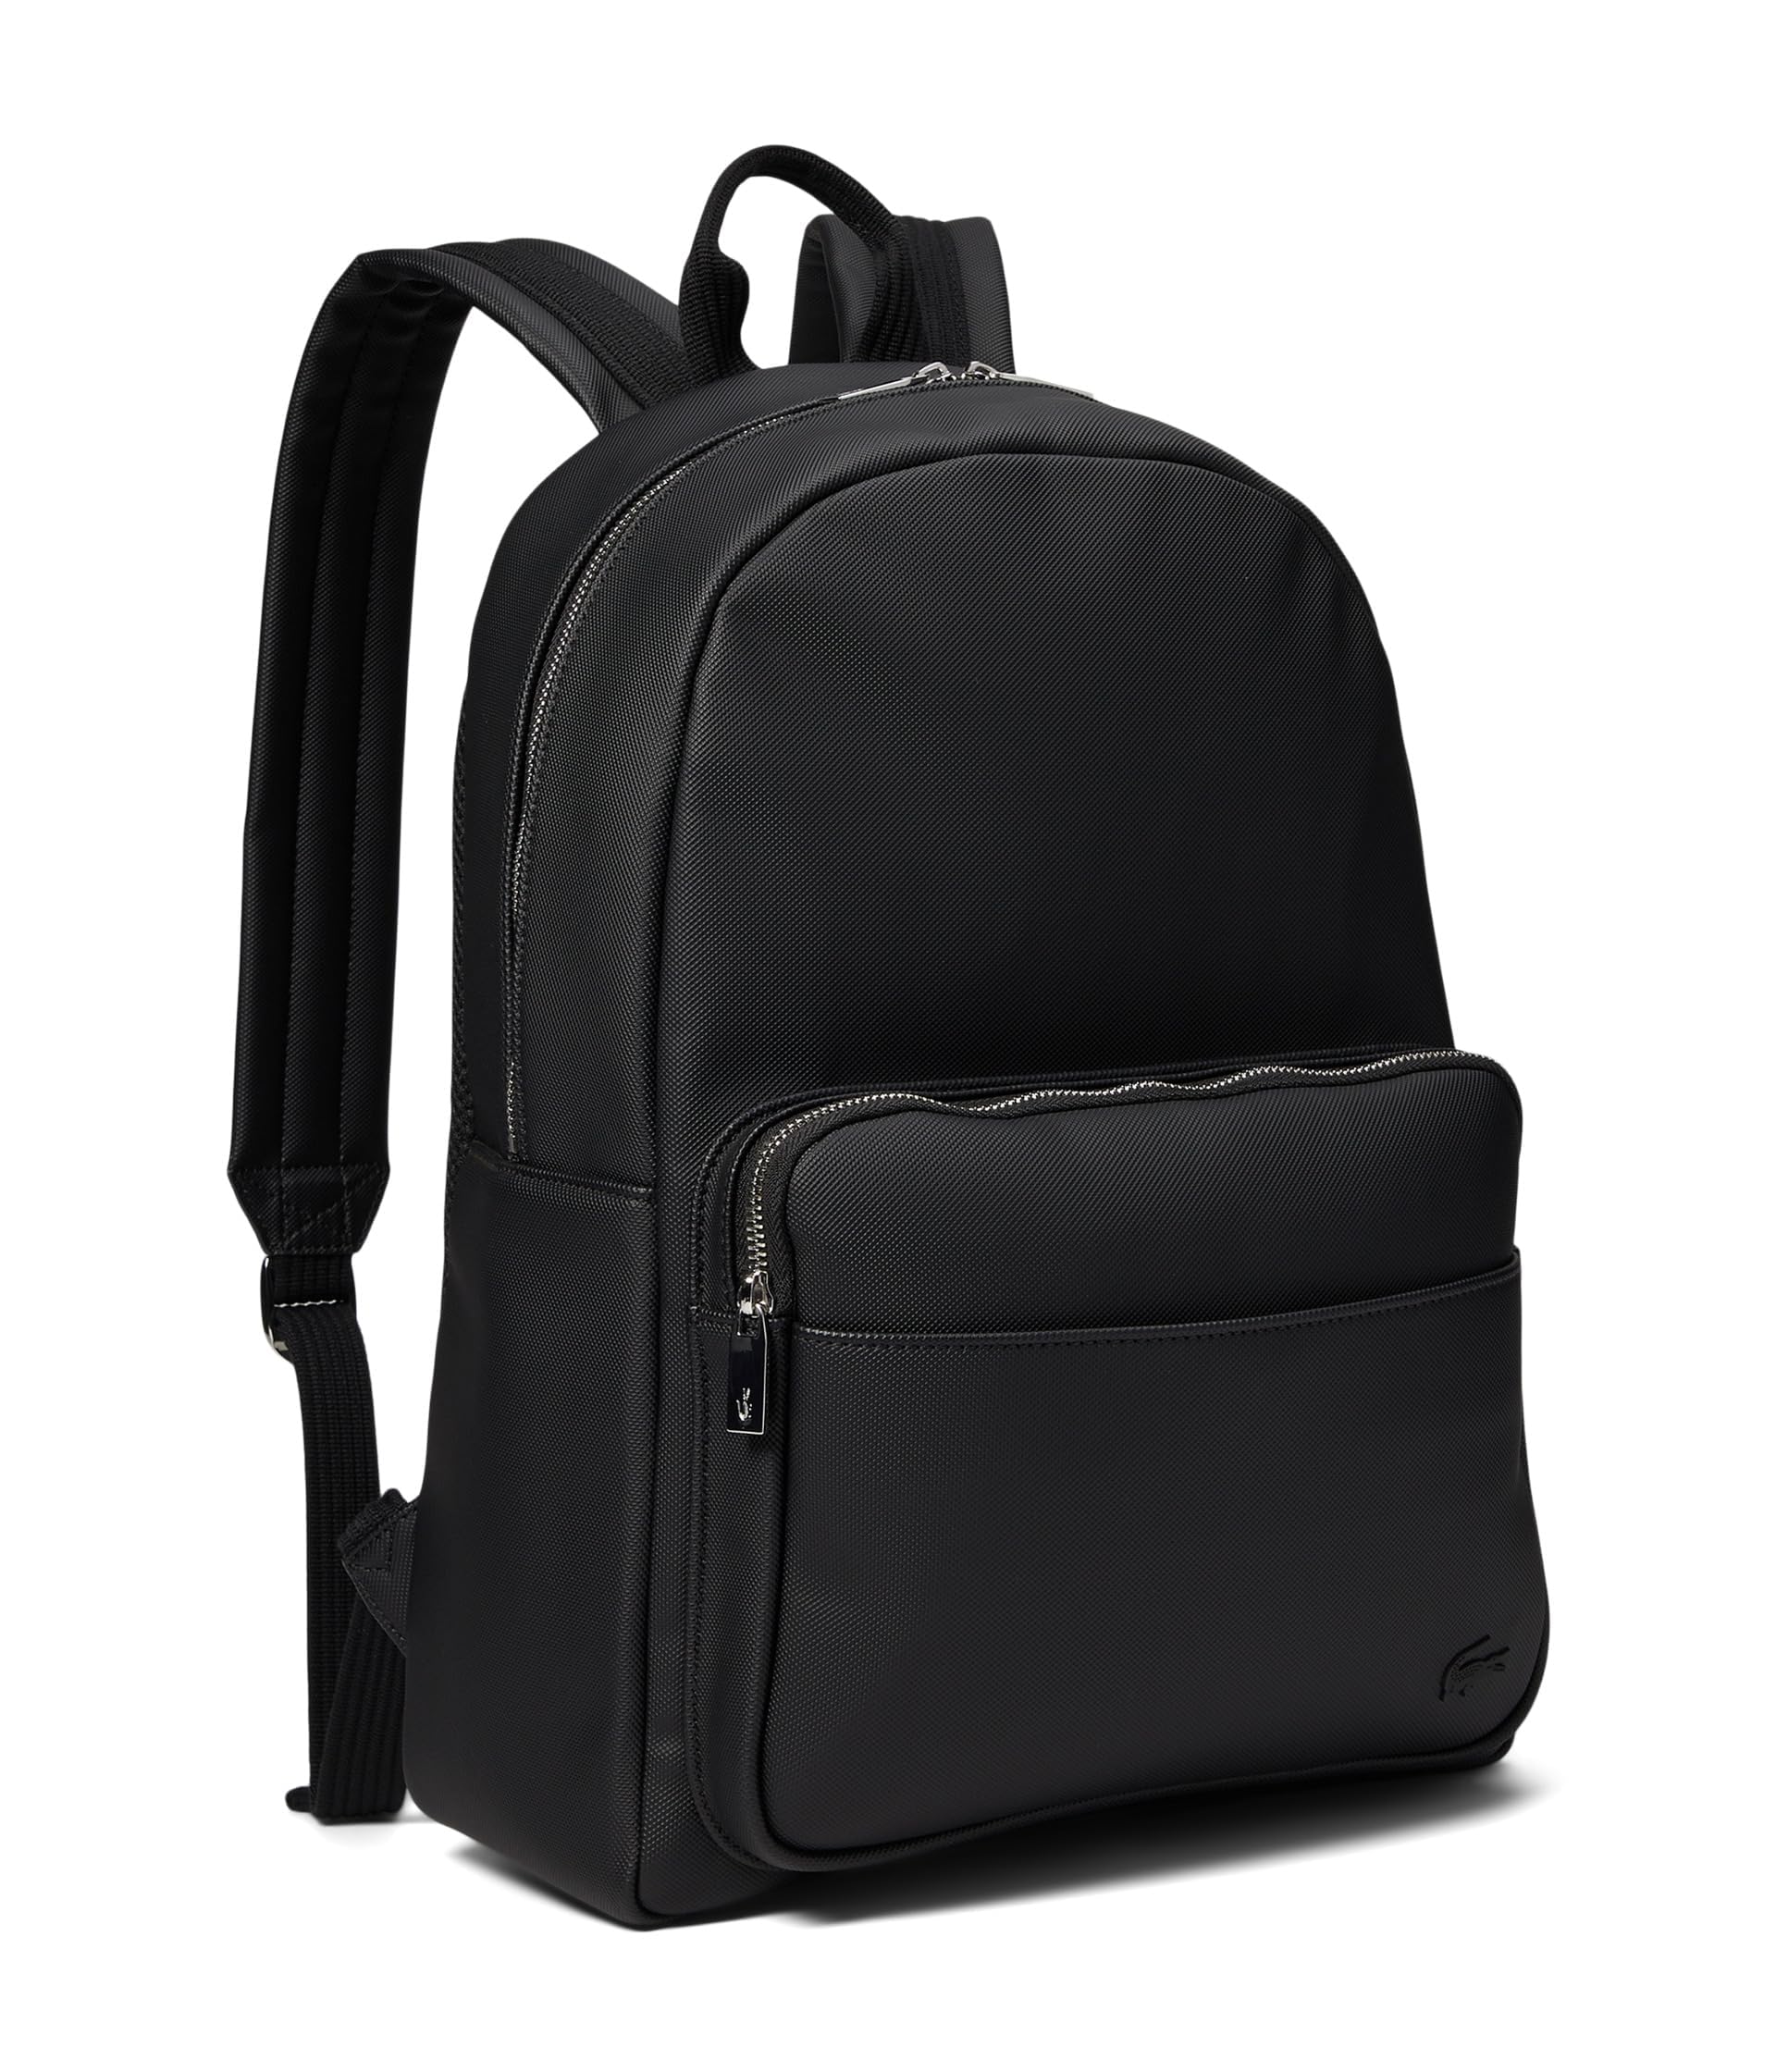 Lacoste Men's Classic Backpack, Black, One Size